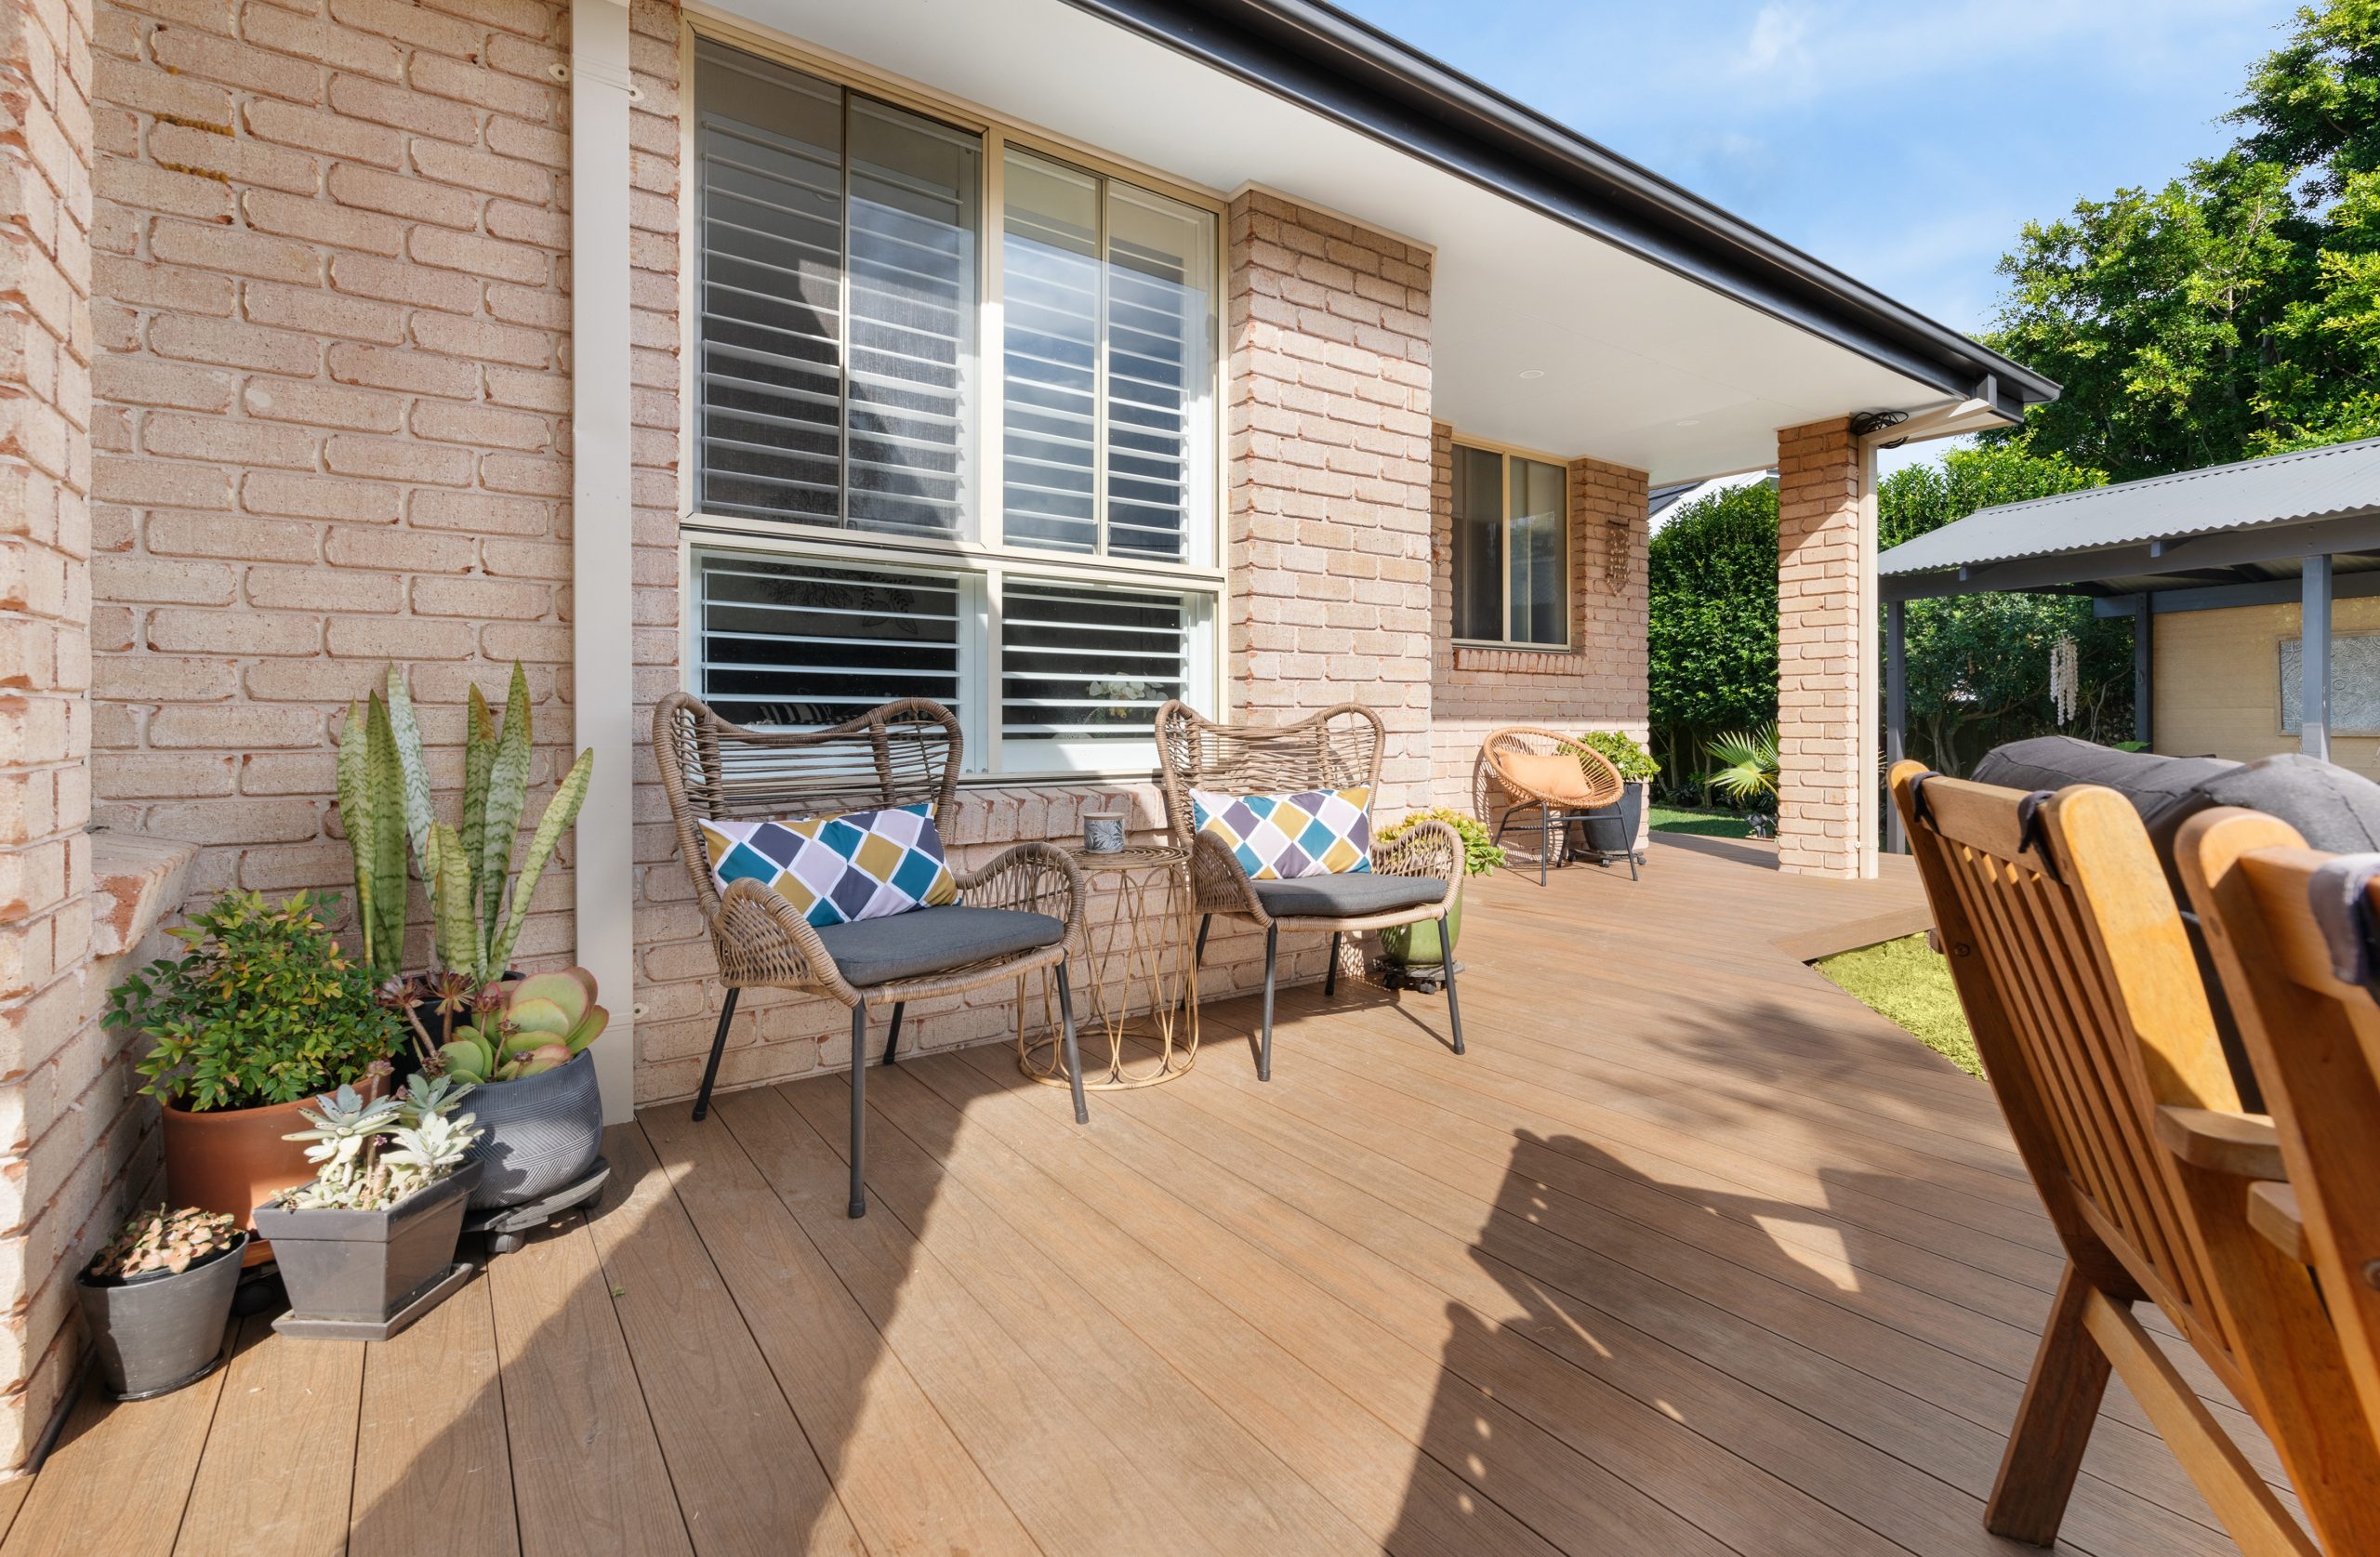 Natural composite decking boards on a finished outdoor patio